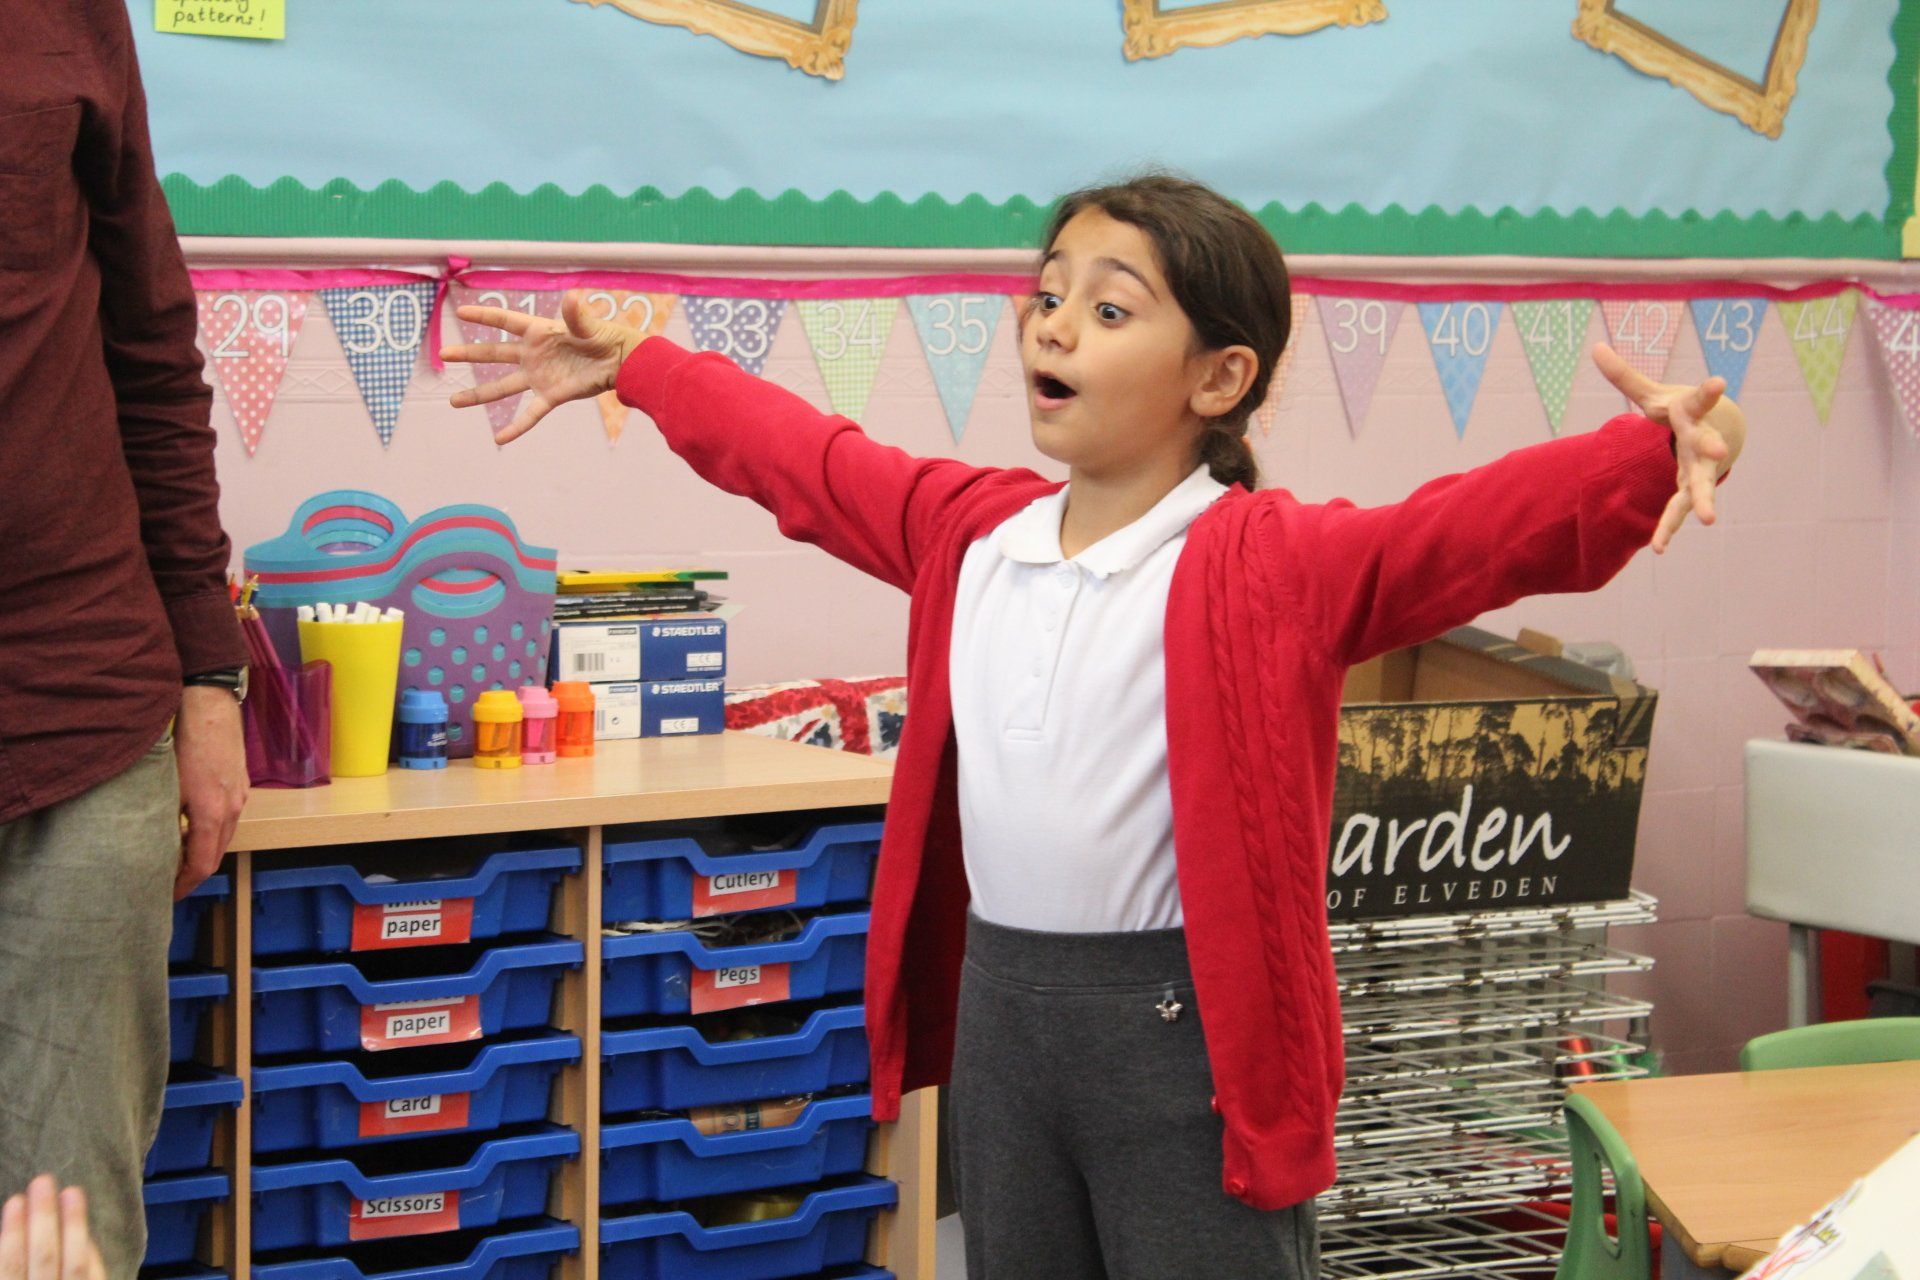 a girl in a red cardigan is standing in a classroom with her arms outstretched